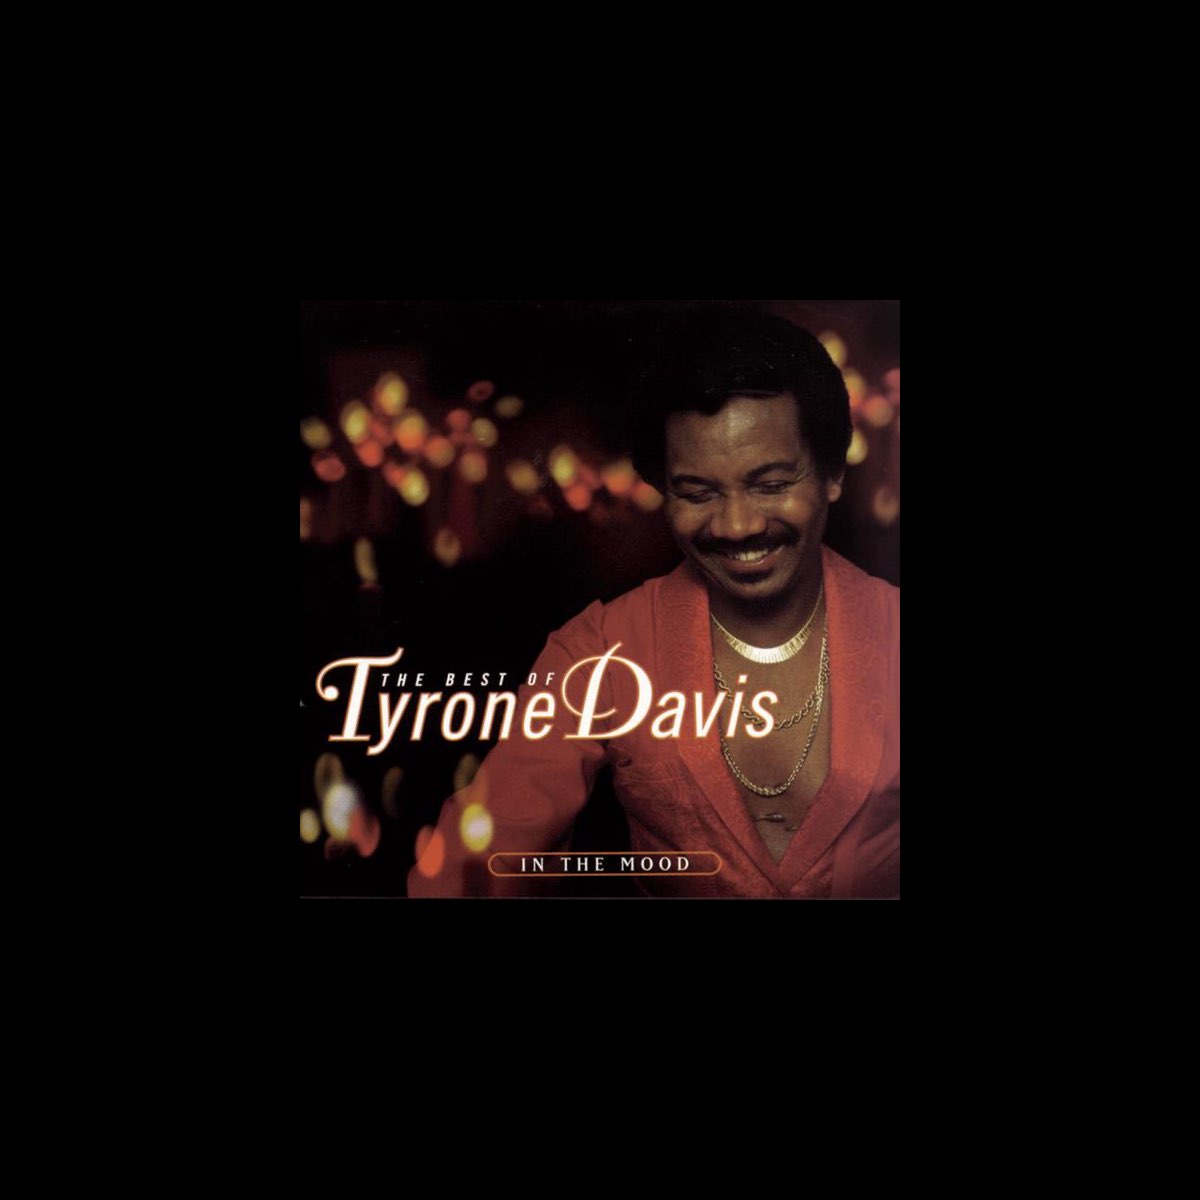 ‎In the Mood - The Best of Tyrone Davis by Tyrone Davis on Apple Music